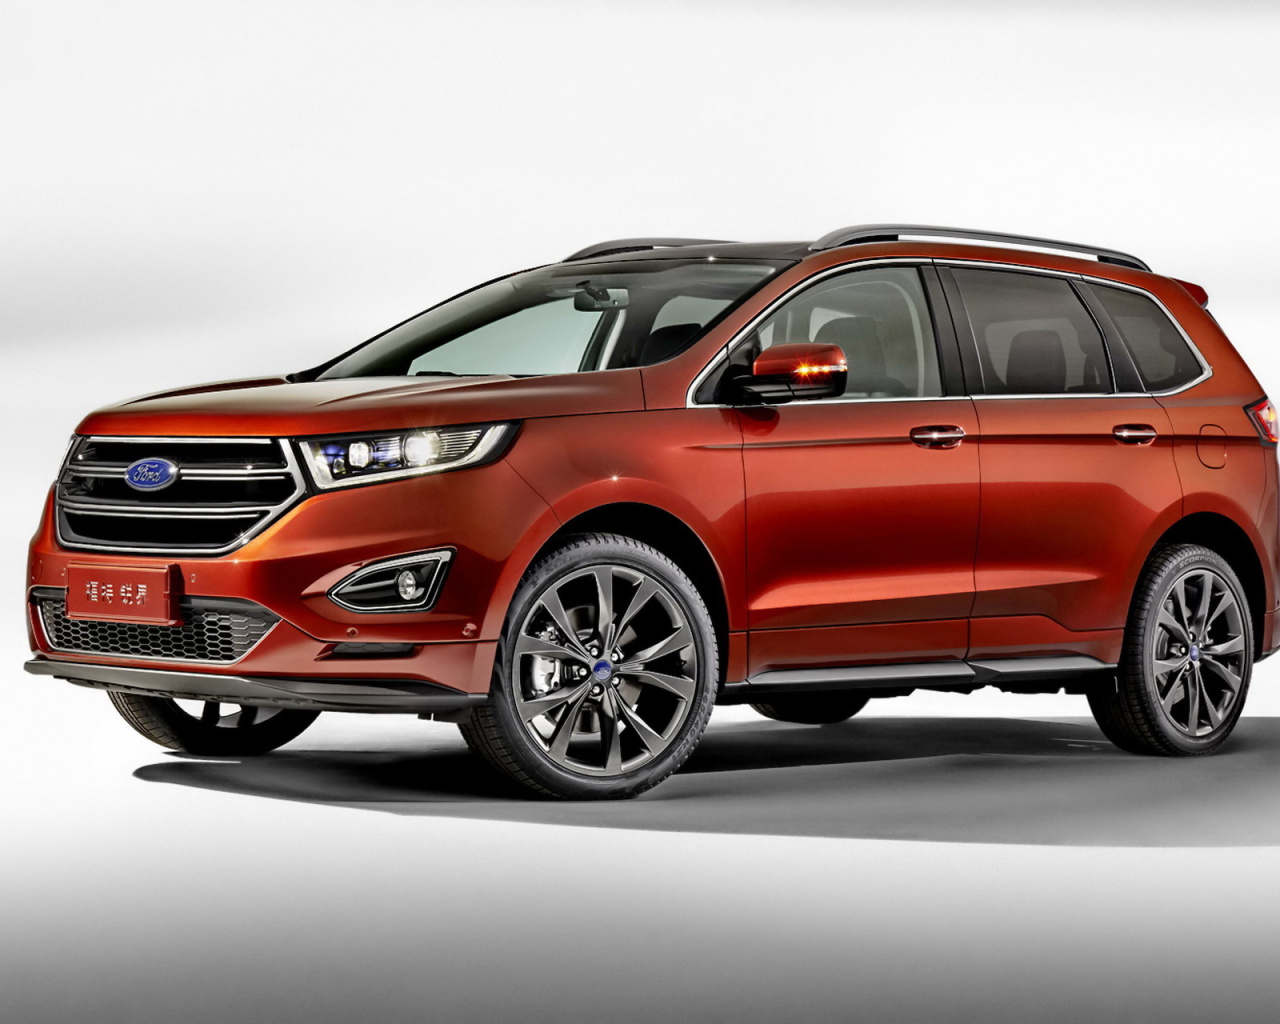 2014 Ford Edge Crossover wallpaper 1280x1024